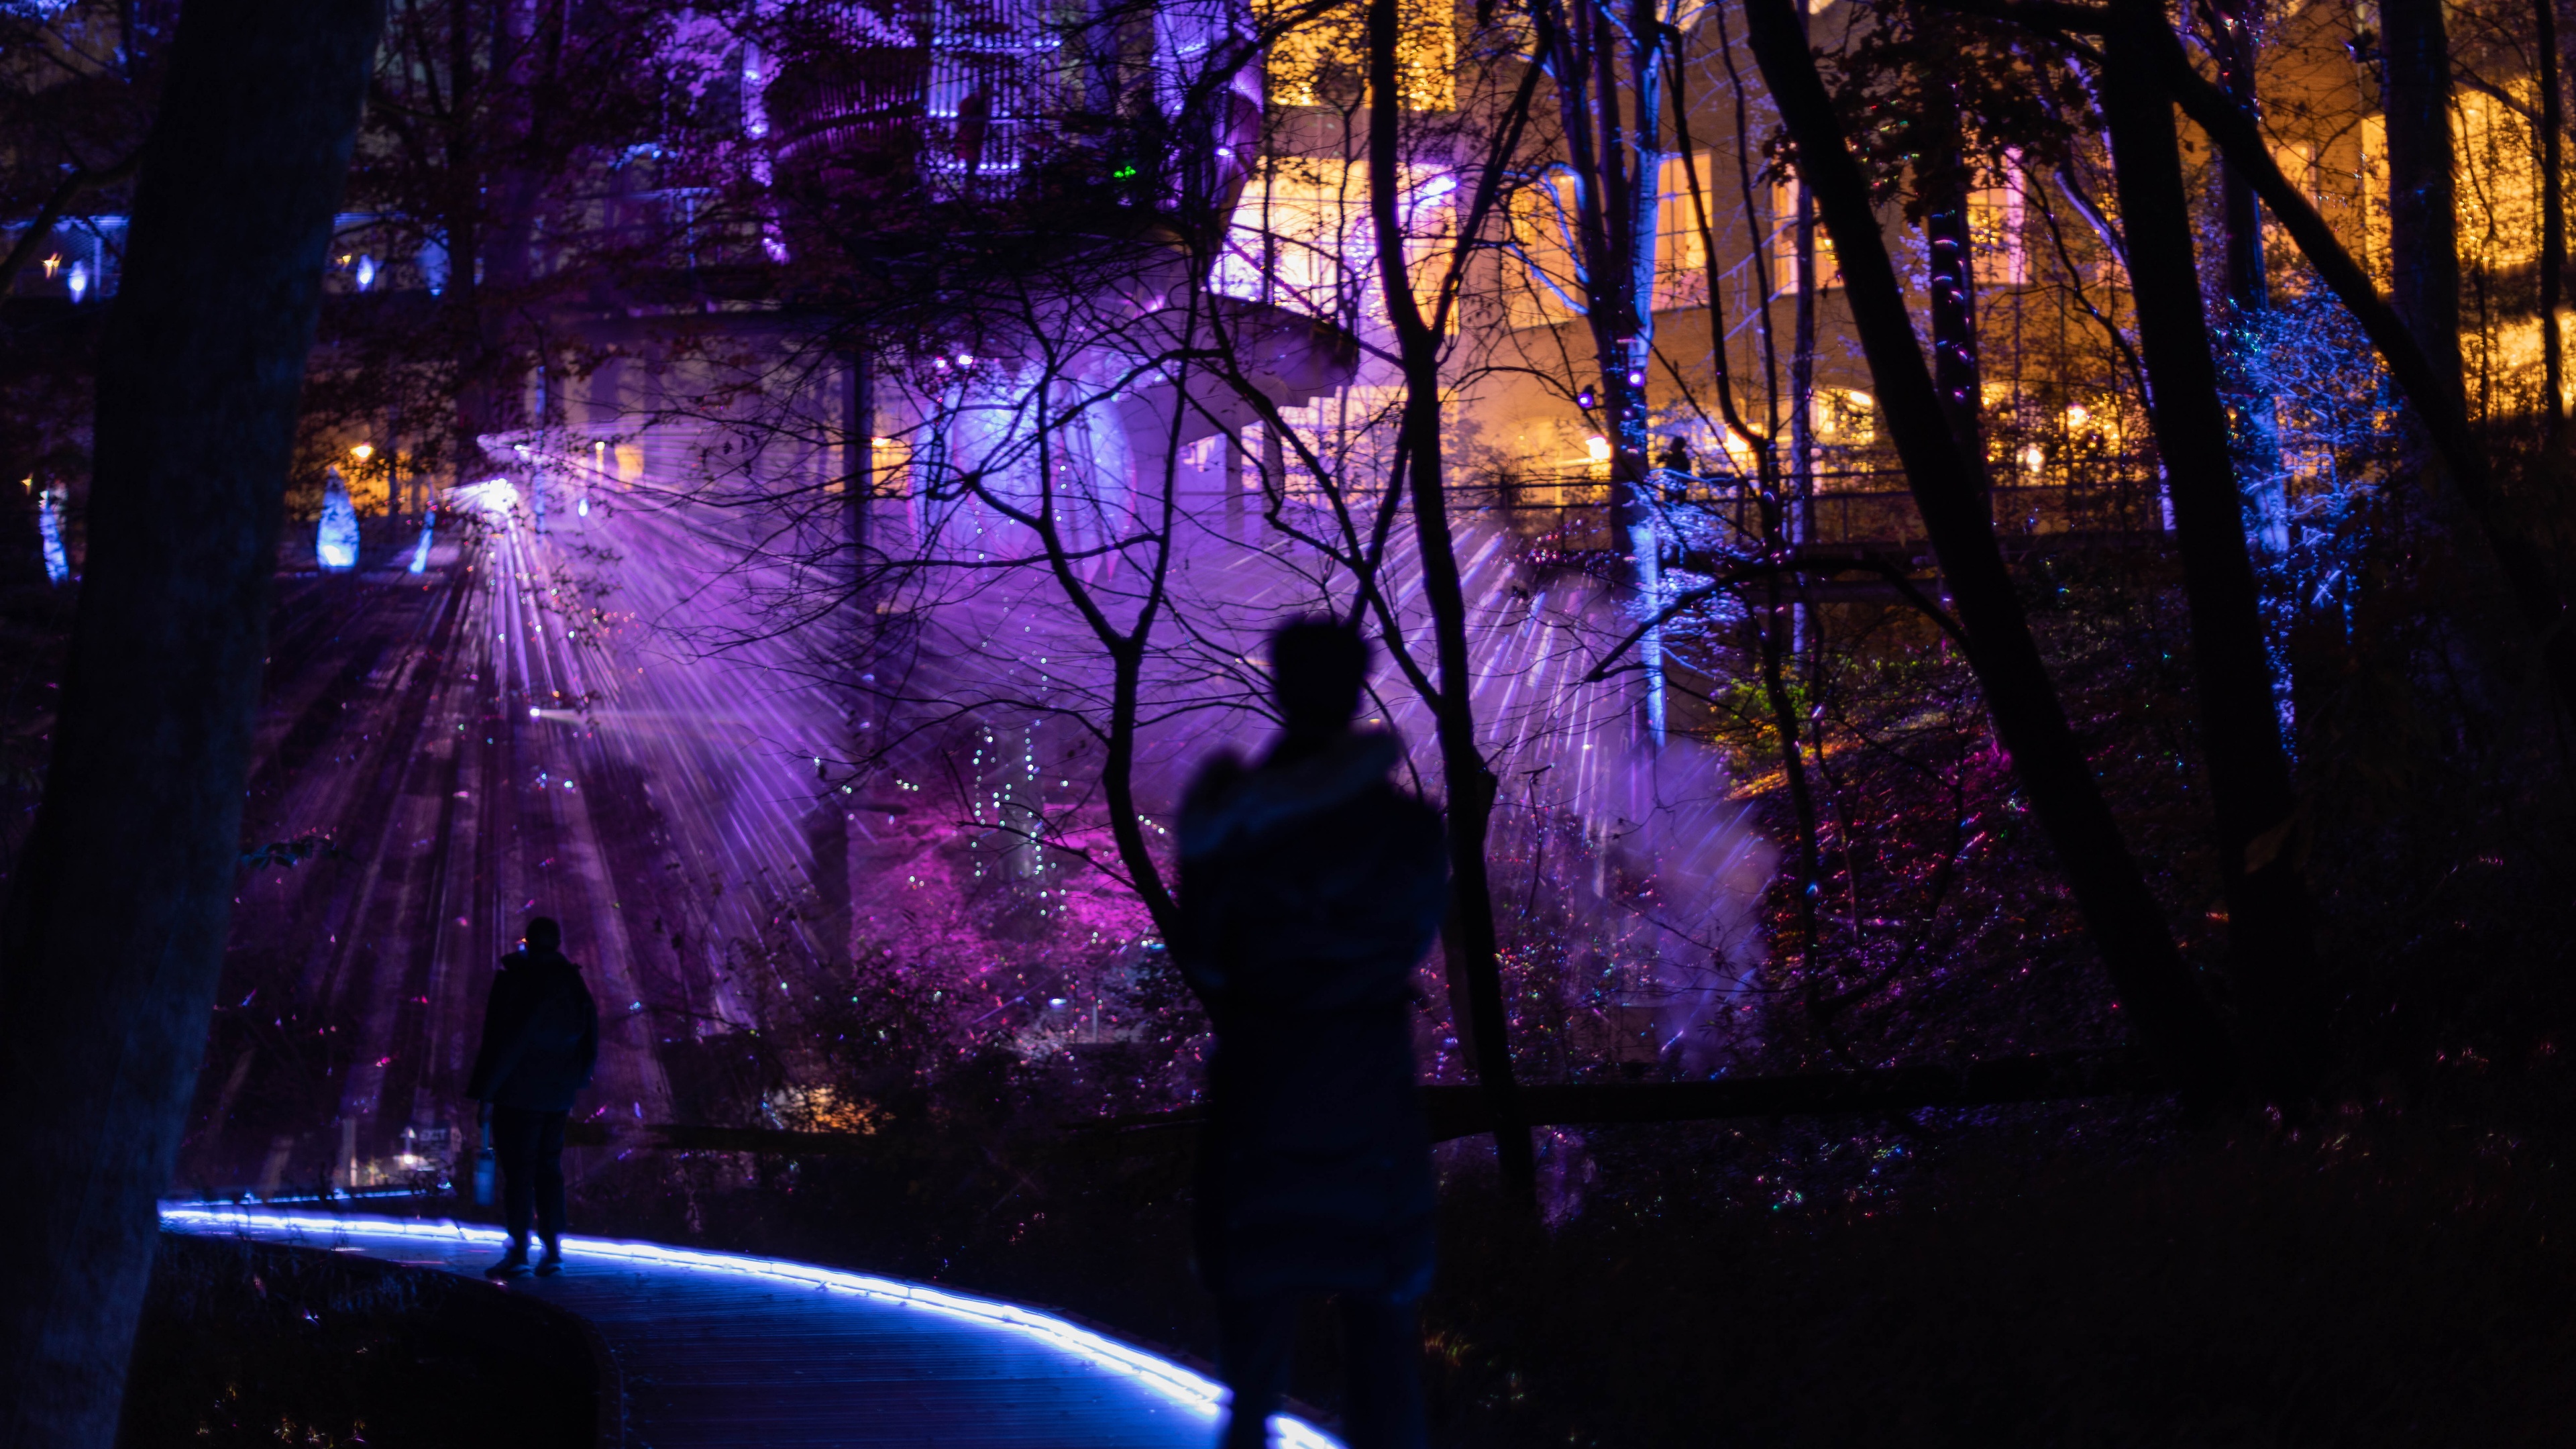 Person silhouetted in the foreground looking at purple lights and haze in a forest. There is a building in the background with amber lights.